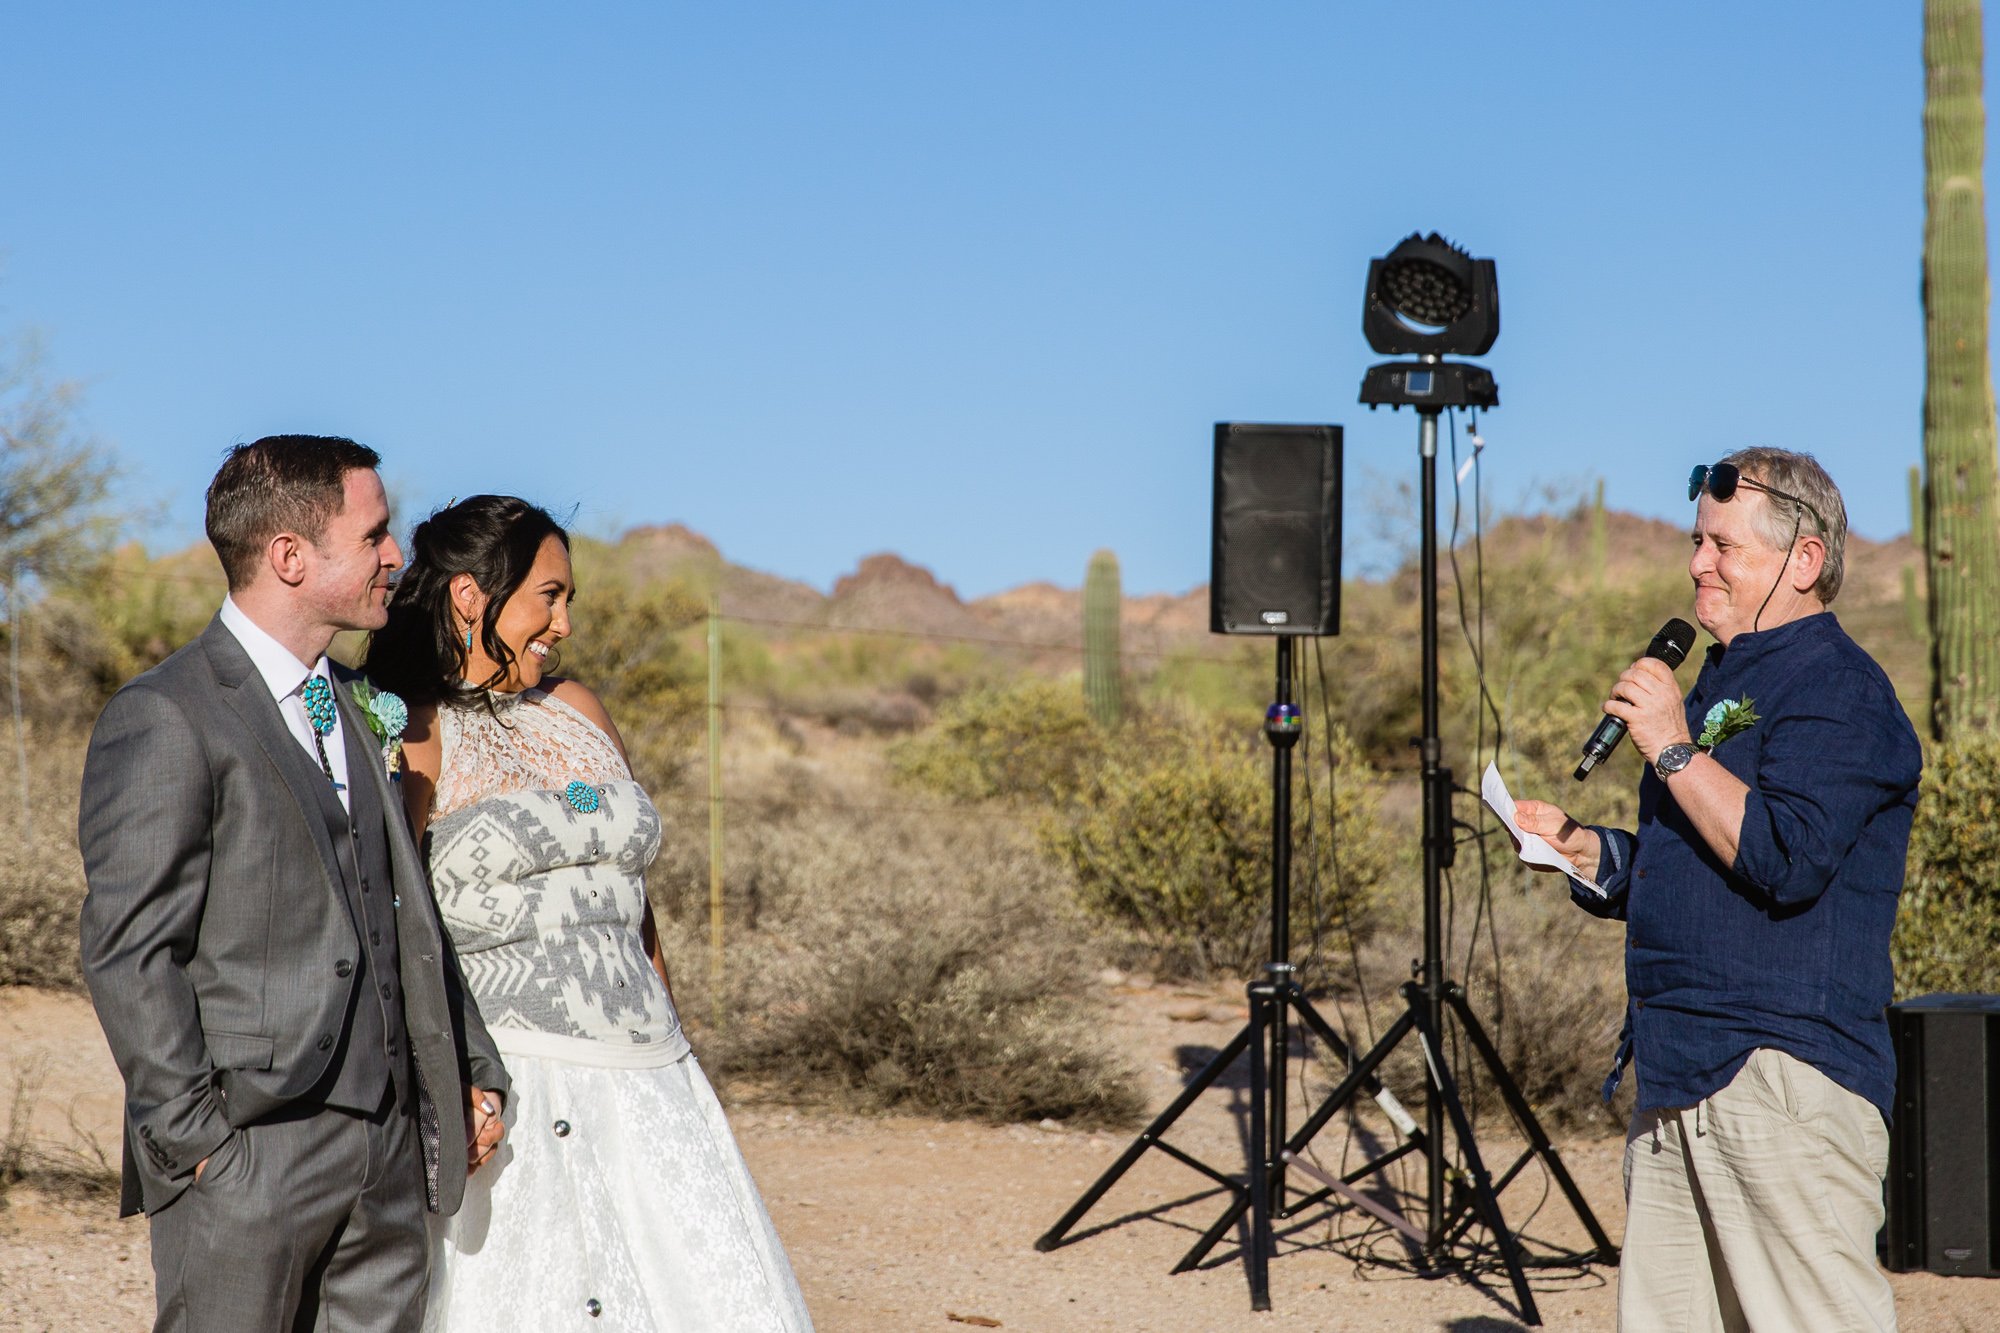 Groom's father giving a toast at the wedding reception at Lost Dutchman State Park by Arizona wedding photographer PMA Photography.